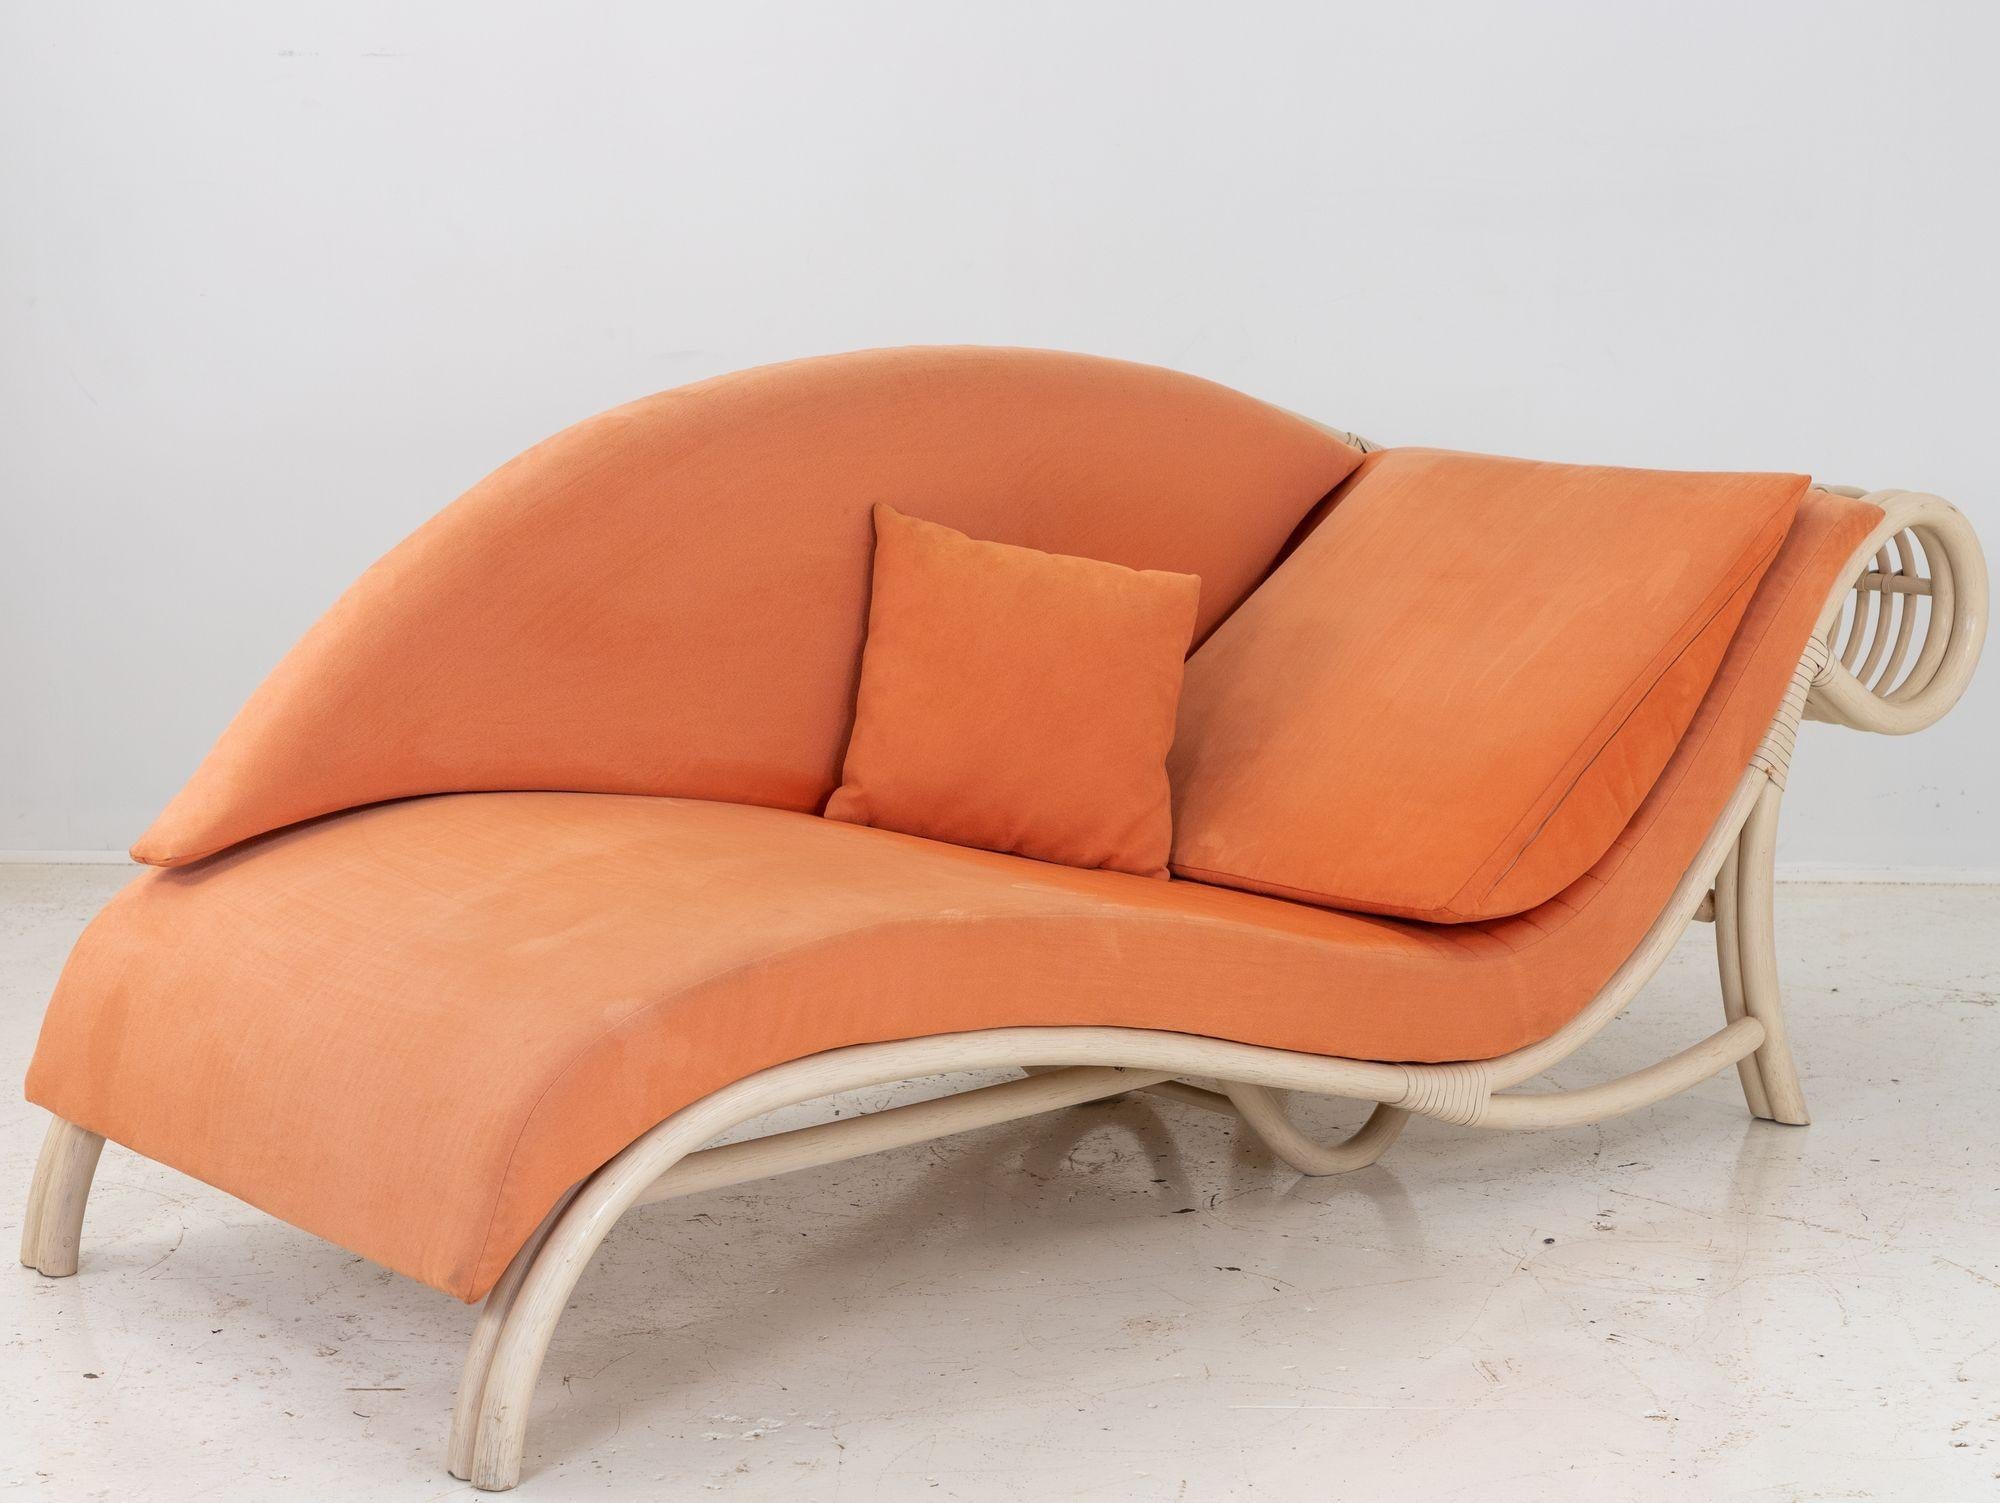 A modern rattan canapé sofa from France in the 1980s. Painted white rattan has a lovely sinuous form with original coral velvet upholstery. Perfect for upholstery. Wear consistent with age and use. Measure: Seat height 11